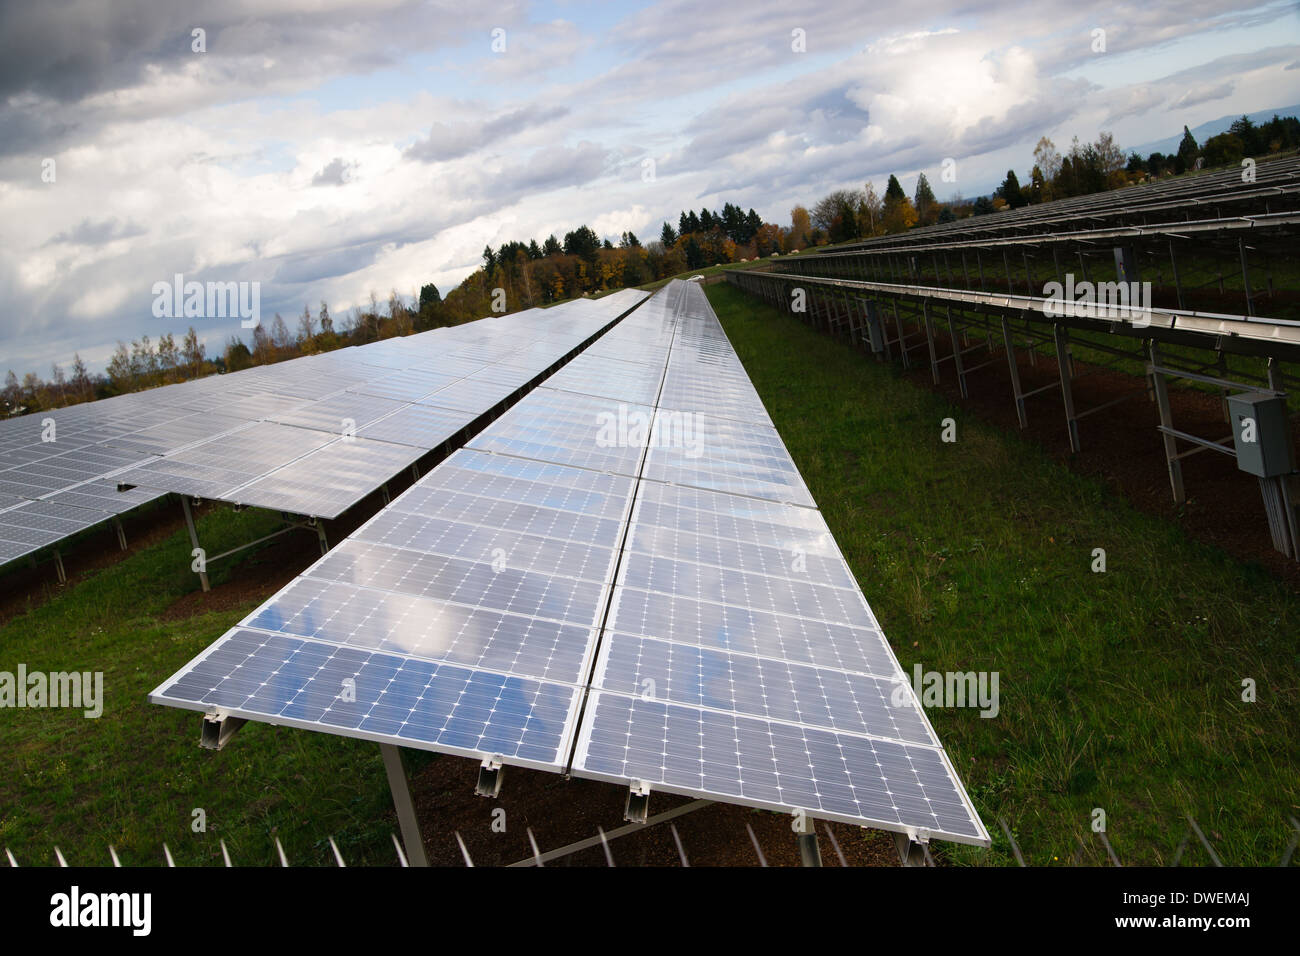 Solar energy is gaining popularity and a sun farm is shown here Stock Photo